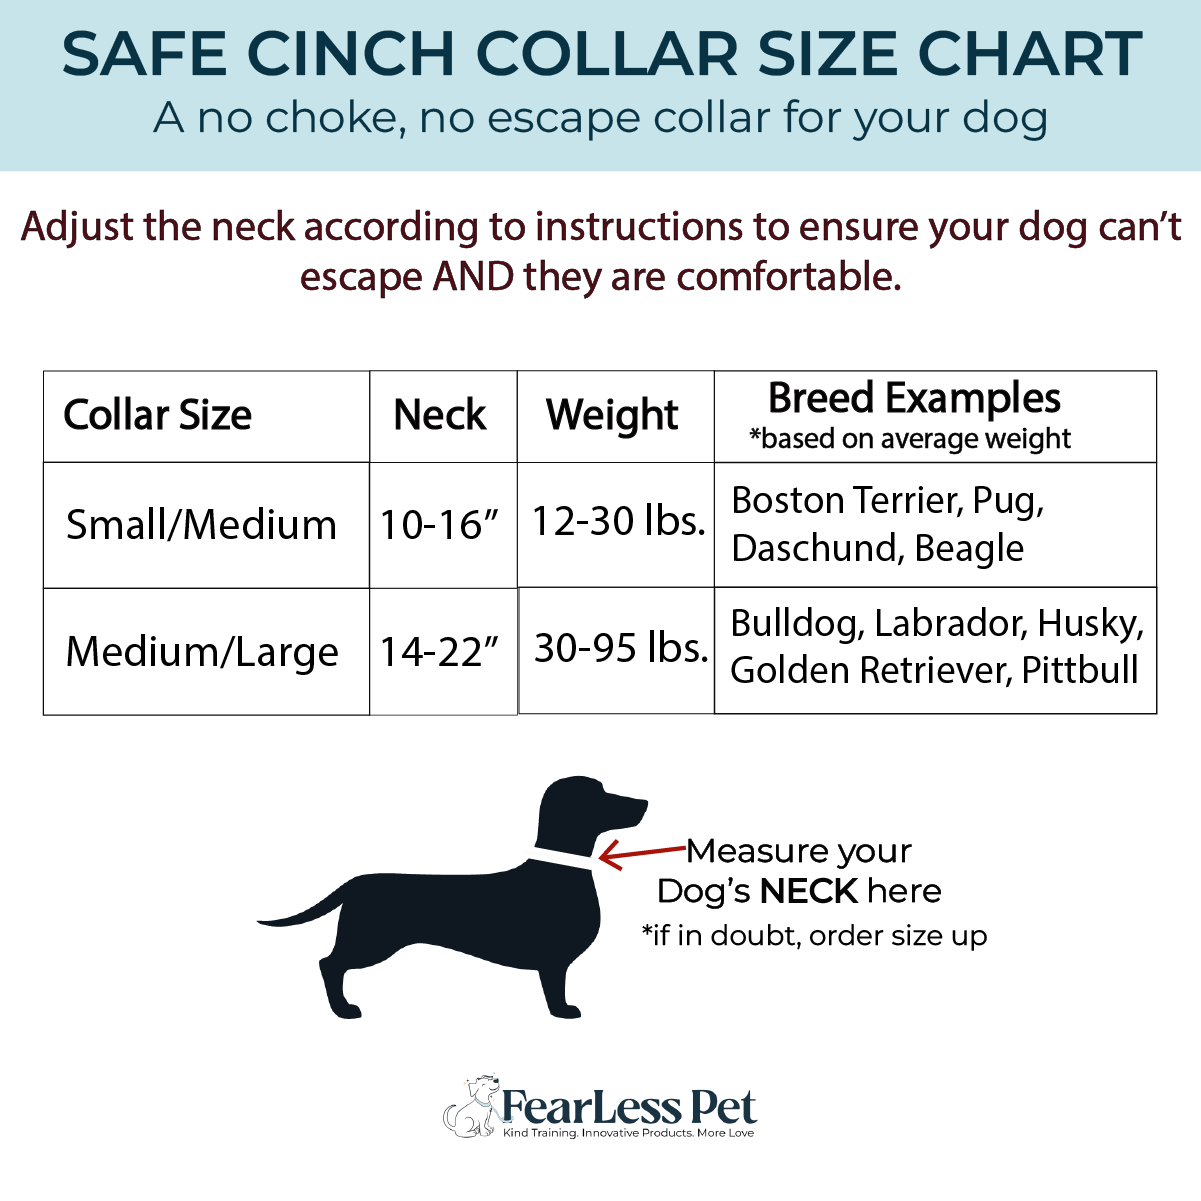 a size chart for fearless pets safe cinch dog collar for small, medium and large dogs weighing between 12 and 95 lbs